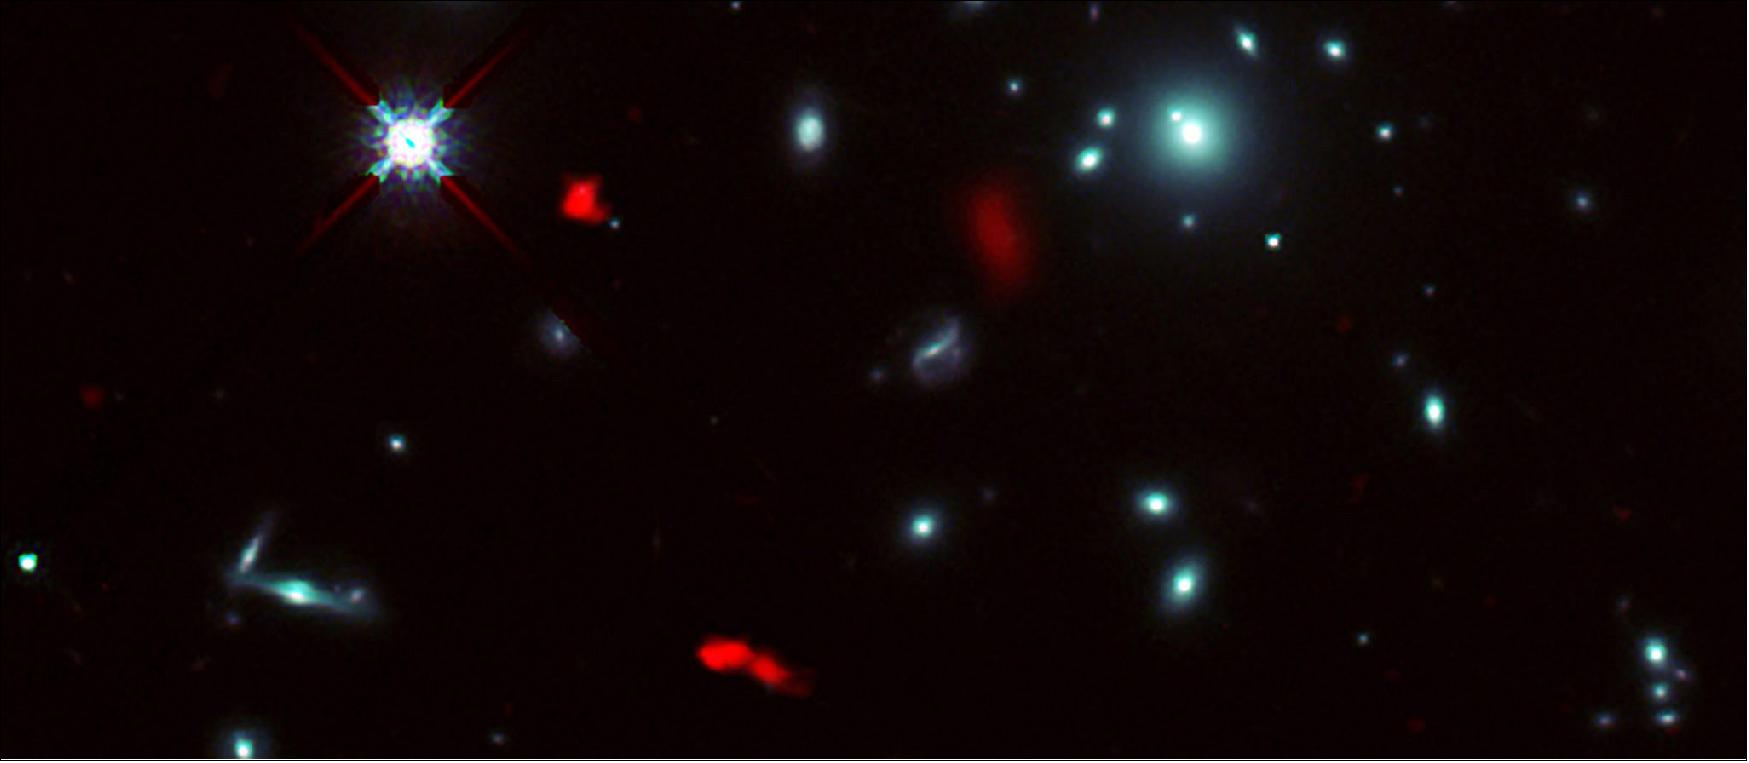 Figure 38: Image of the galaxy cluster RXCJ0600-2007 taken by the NASA/ESA Hubble Space Telescope, combined with gravitational lensing images of the distant galaxy RXCJ0600-z6, 12.4 billion light-years away, observed by ALMA (shown in red). Due to the gravitational lensing effect by the galaxy cluster, the image of RXCJ0600-z6 was intensified and magnified, and appeared to be divided into three or more parts (image credit: ALMA (ESO/NAOJ/NRAO), Fujimoto et al., NASA/ESA Hubble Space Telescope)